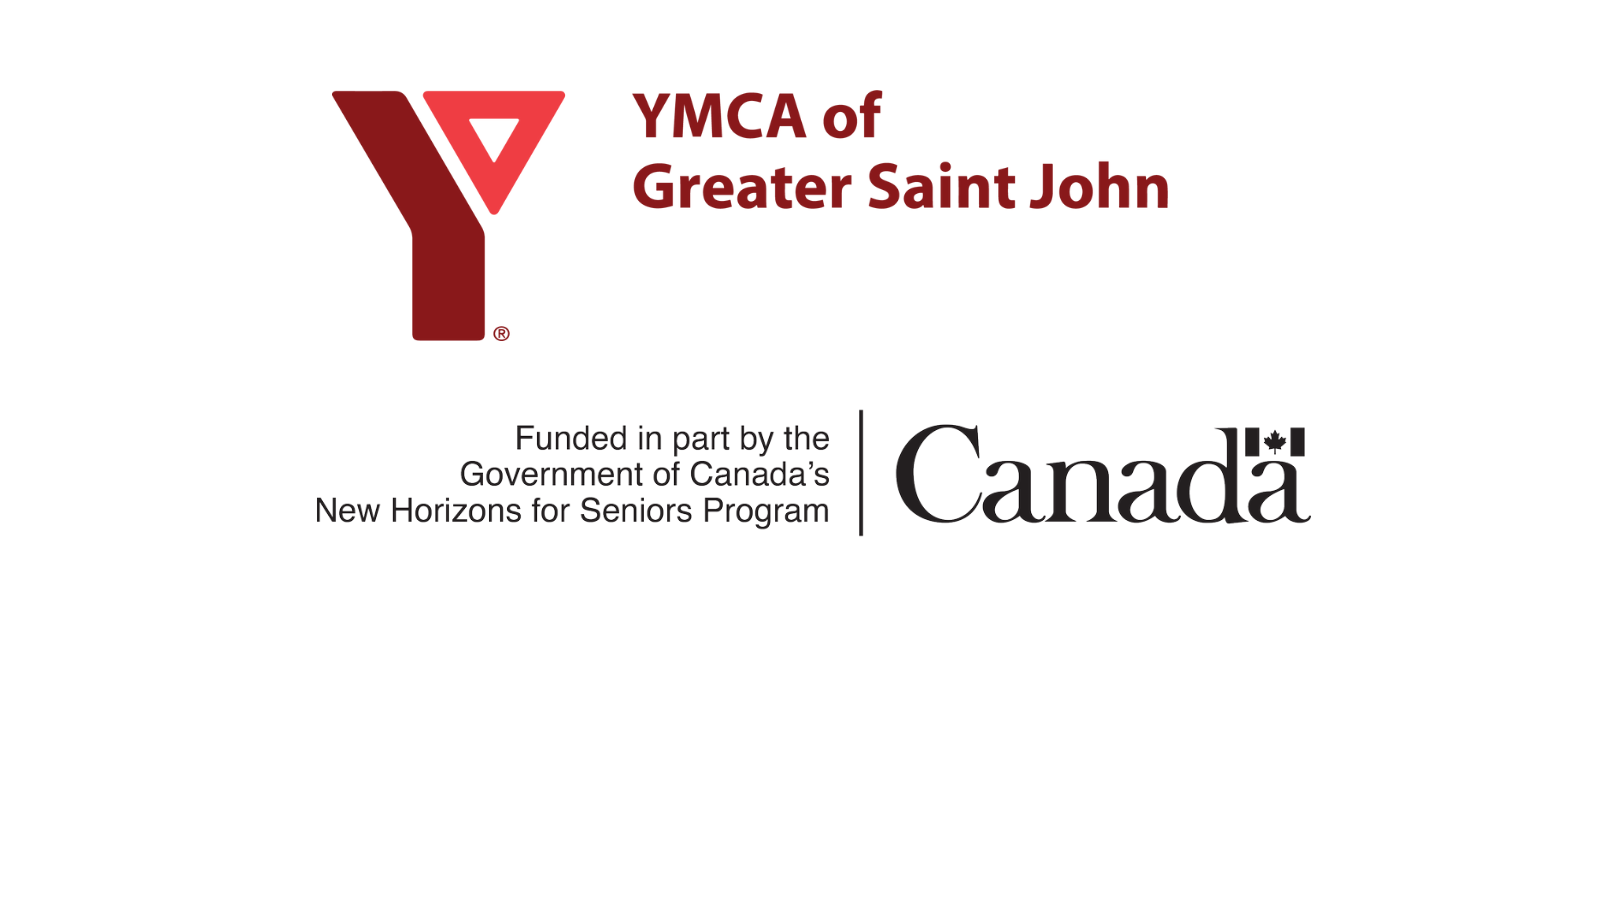 Minds in Motion Funder logos: YMCA of Greater Saint John and the Government of Canada's New Horizons for Seniors Program